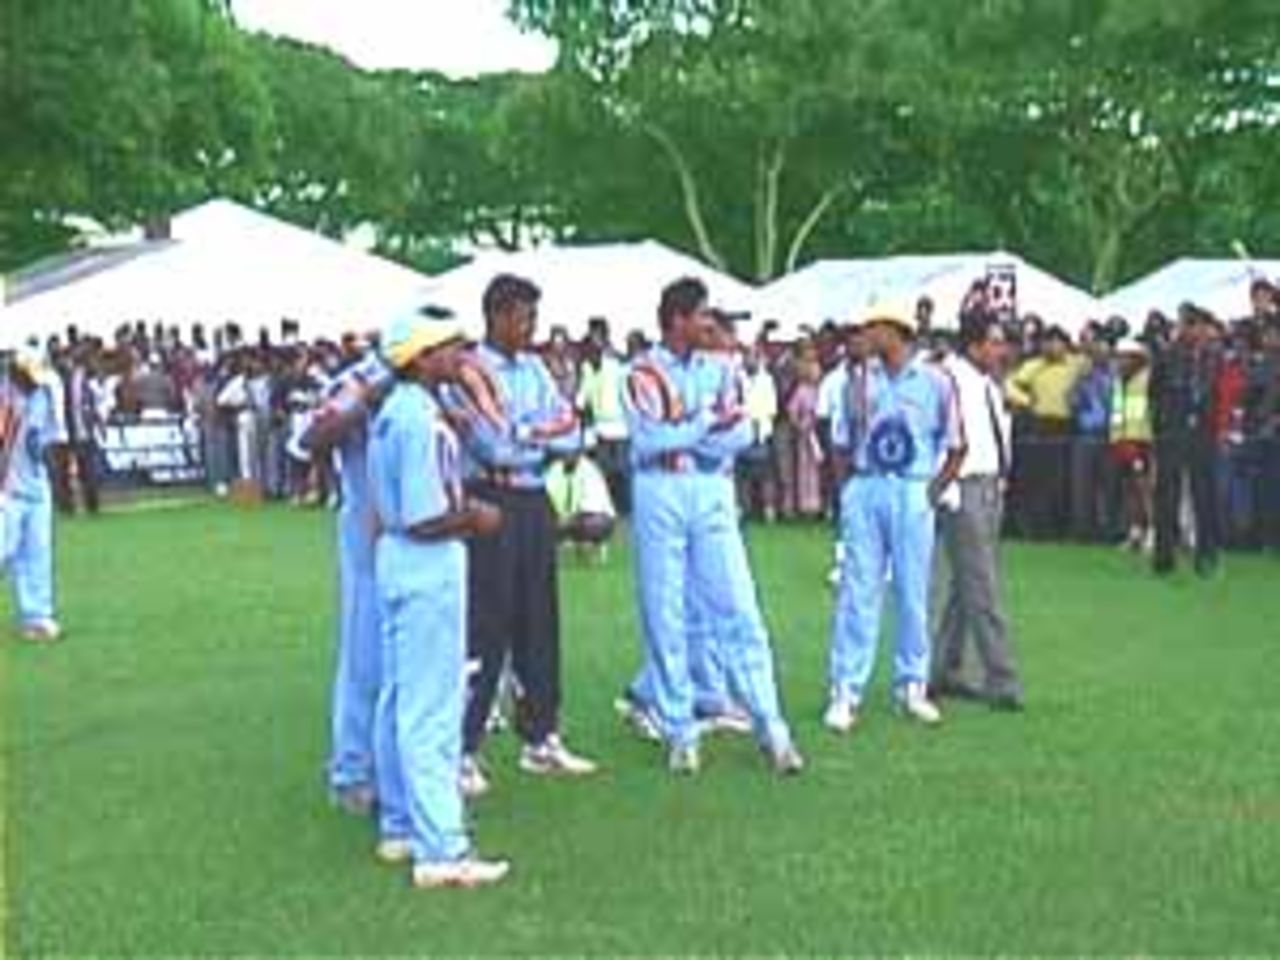 Indian players look on, at the award ceremony, India v West Indies (3rd ODI), Coca-Cola Singapore Challenge, 1999-2000, Kallang Ground, Singapore, 5 Sep 1999.